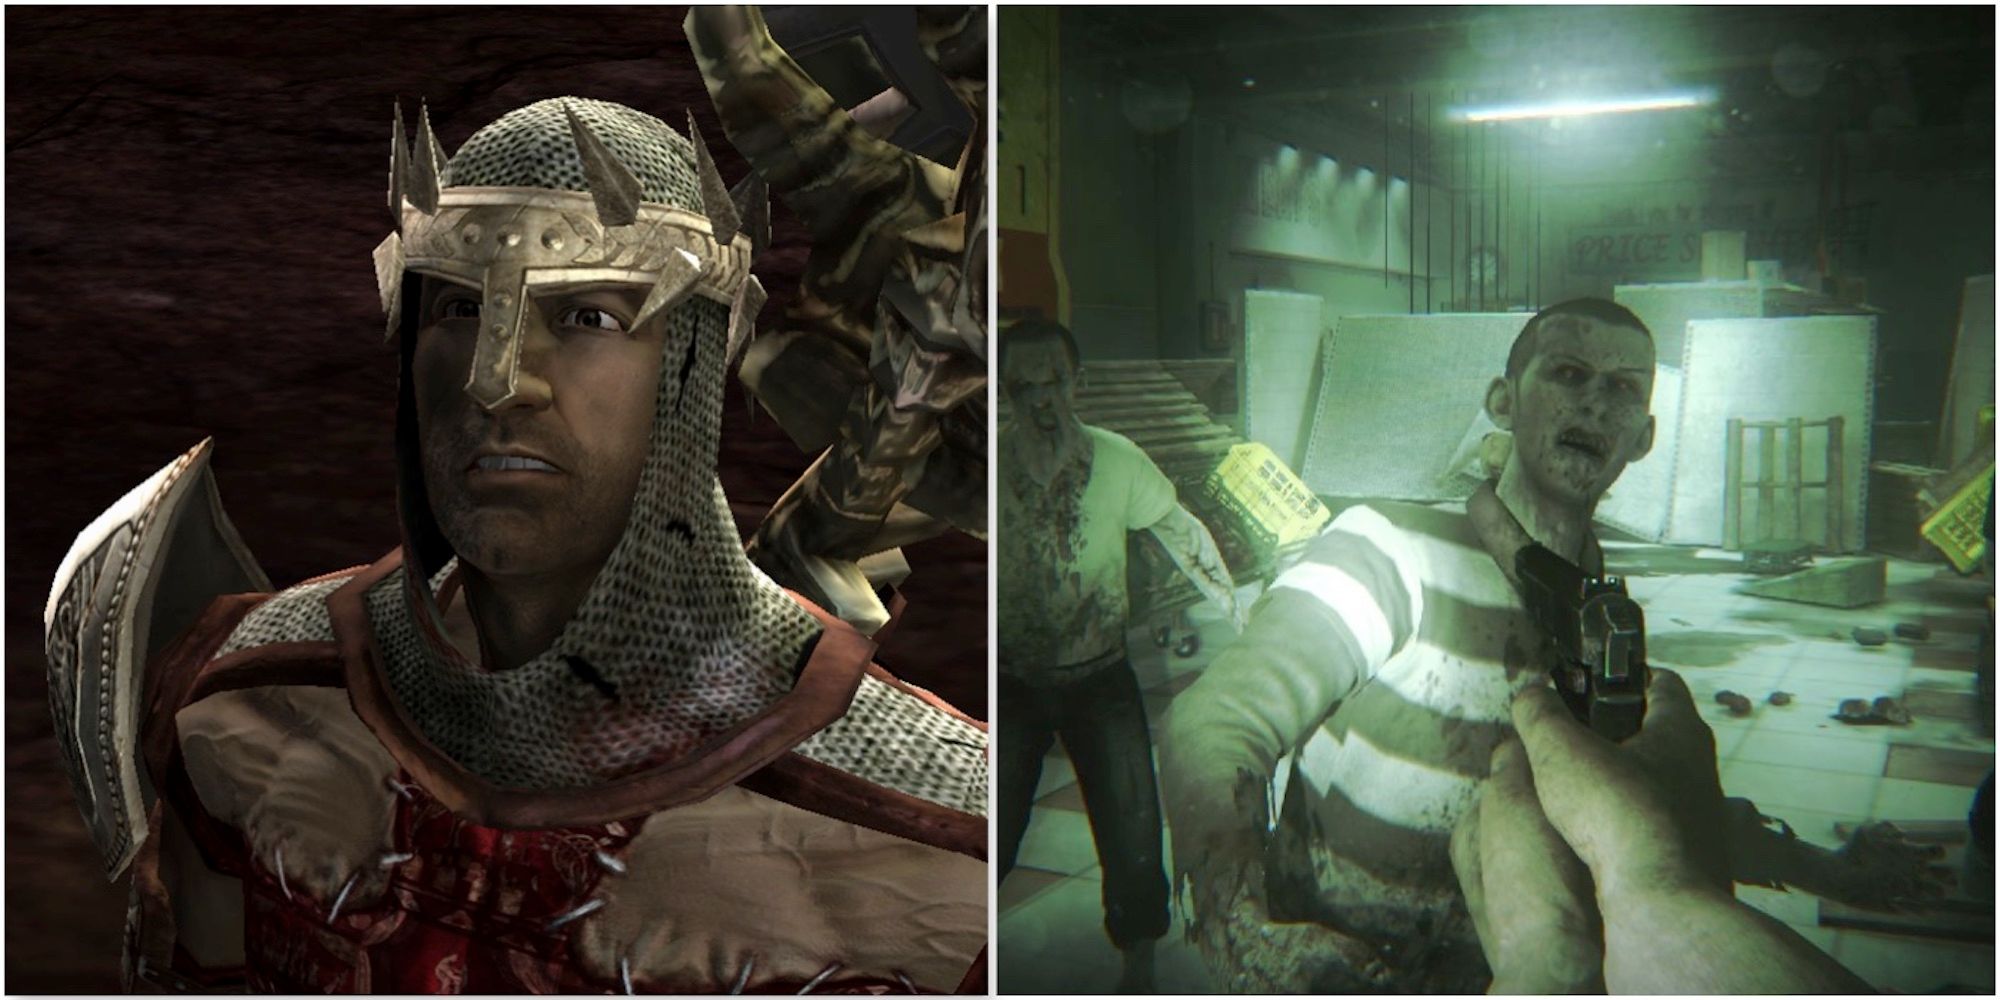 Dante in Dante’s Inferno and fighting zombies in ZombiU